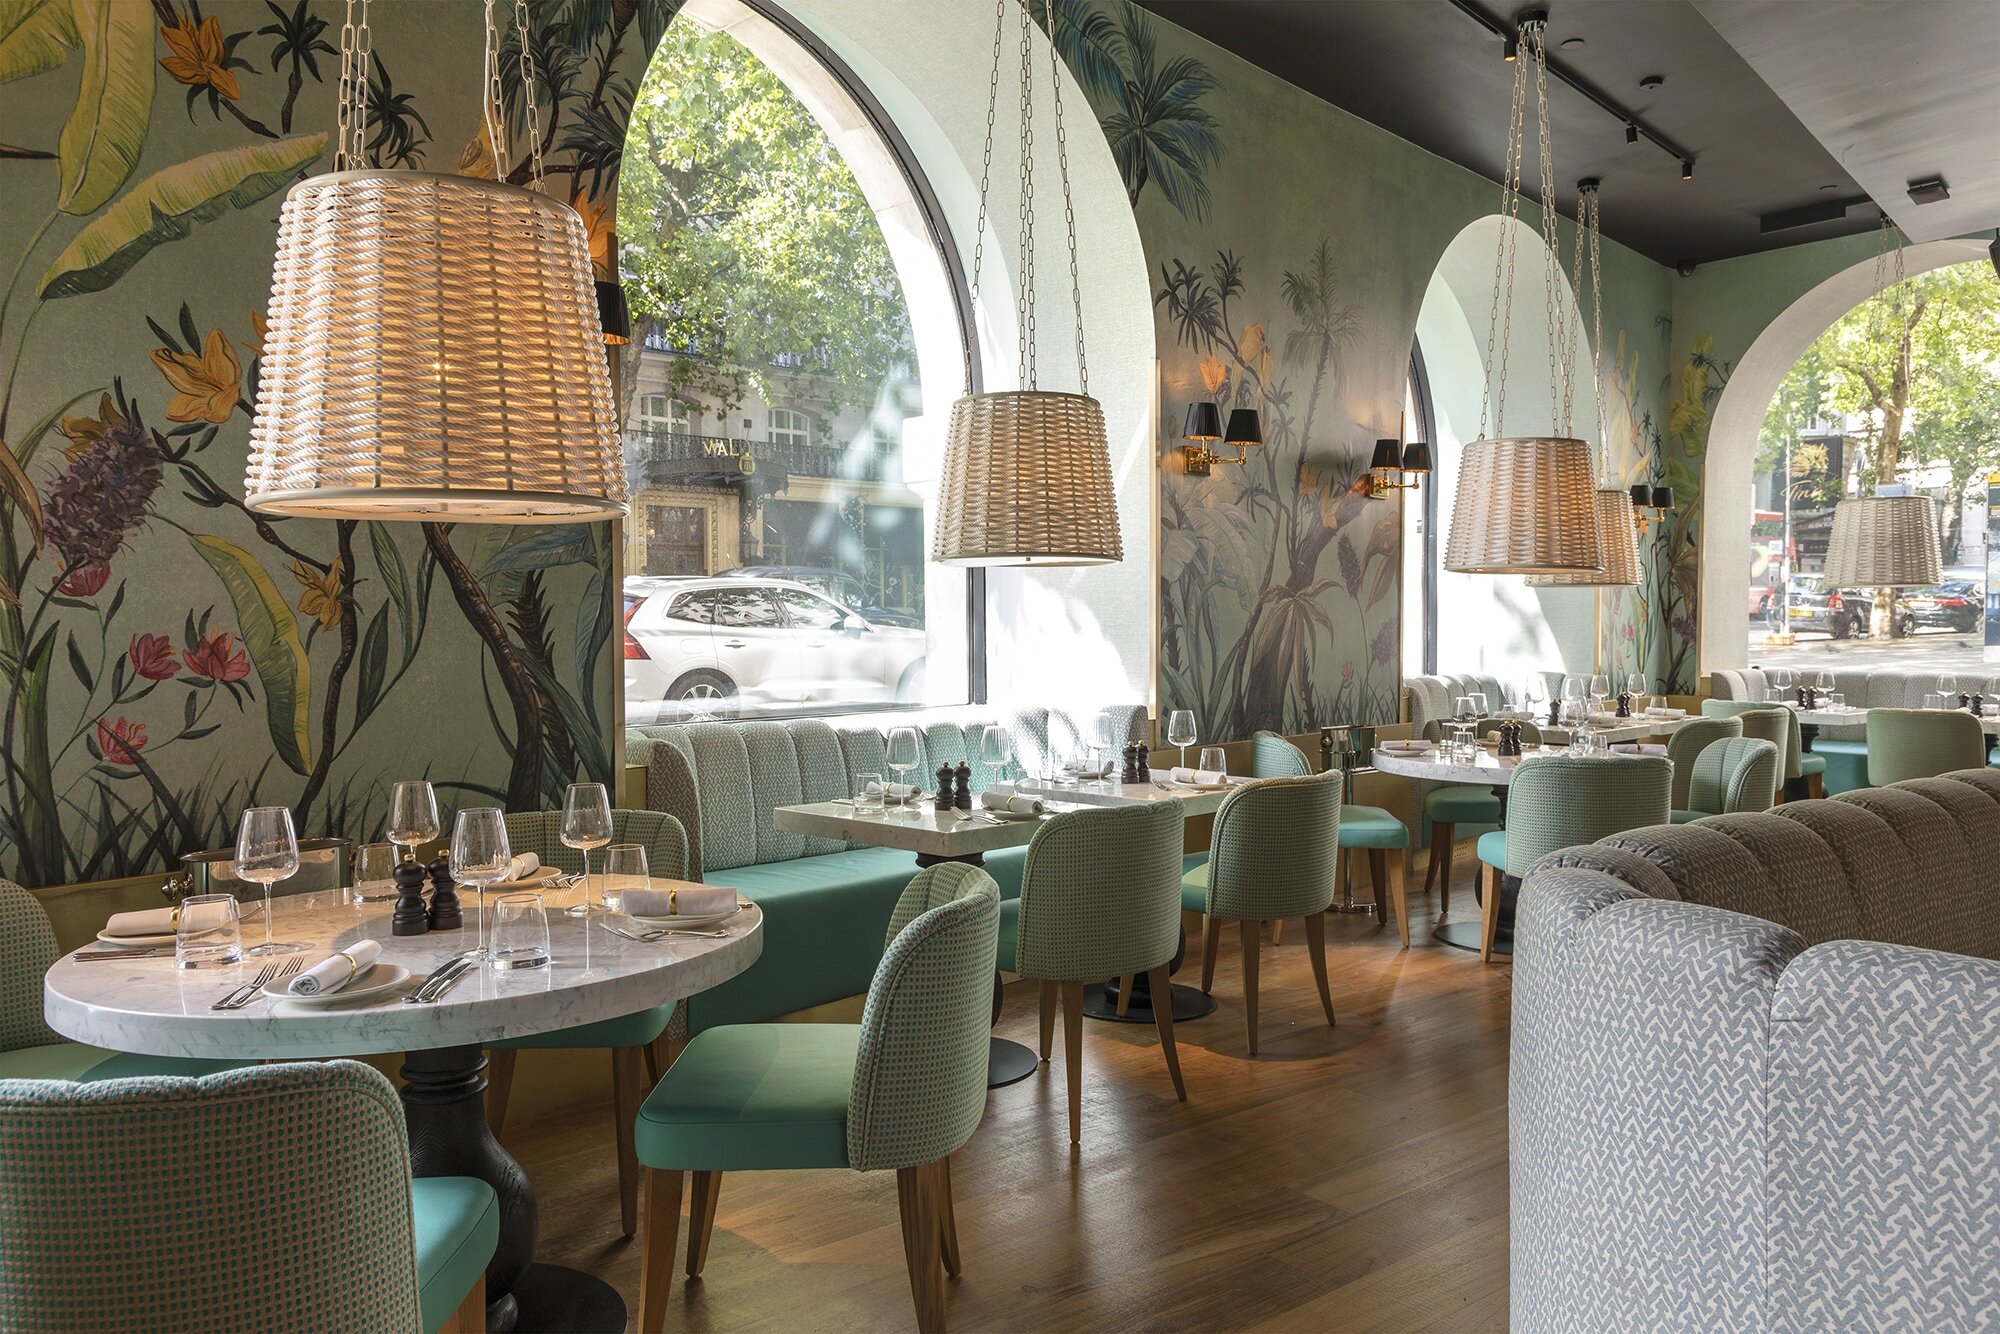 Latest openings: Gino D'Acampo's Luciano, Engine Rooms, Sucre and more